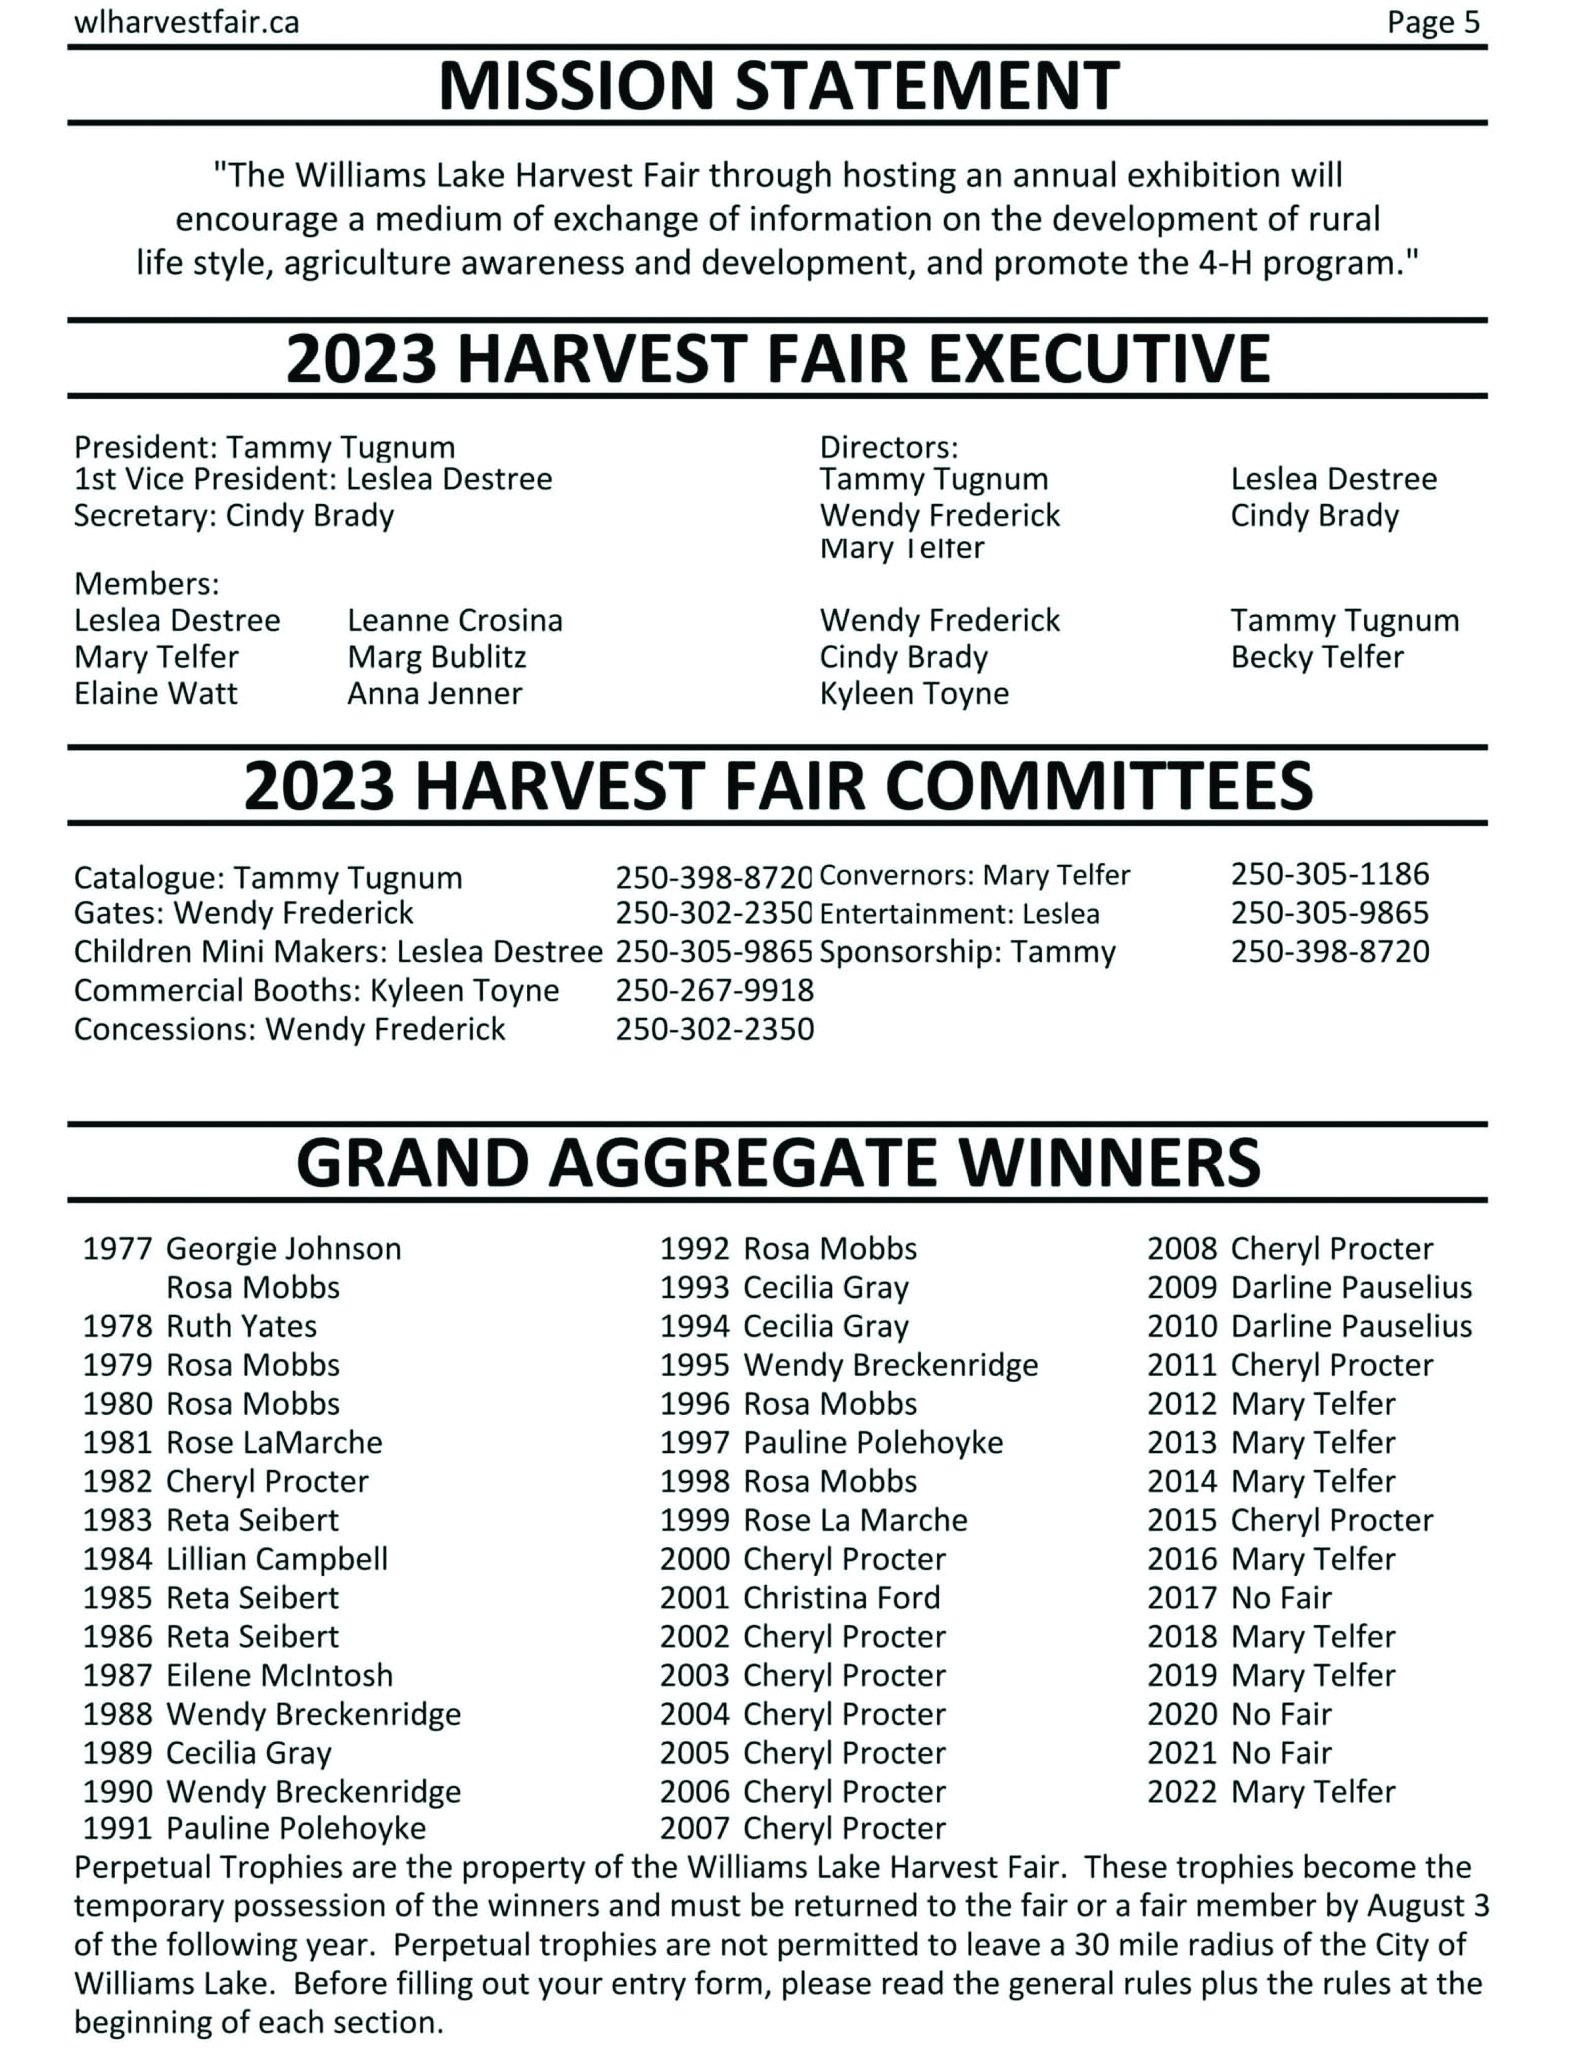 General info for Williams Lake Harvest Fair Exhibitors 2023 - page 1 of 3 